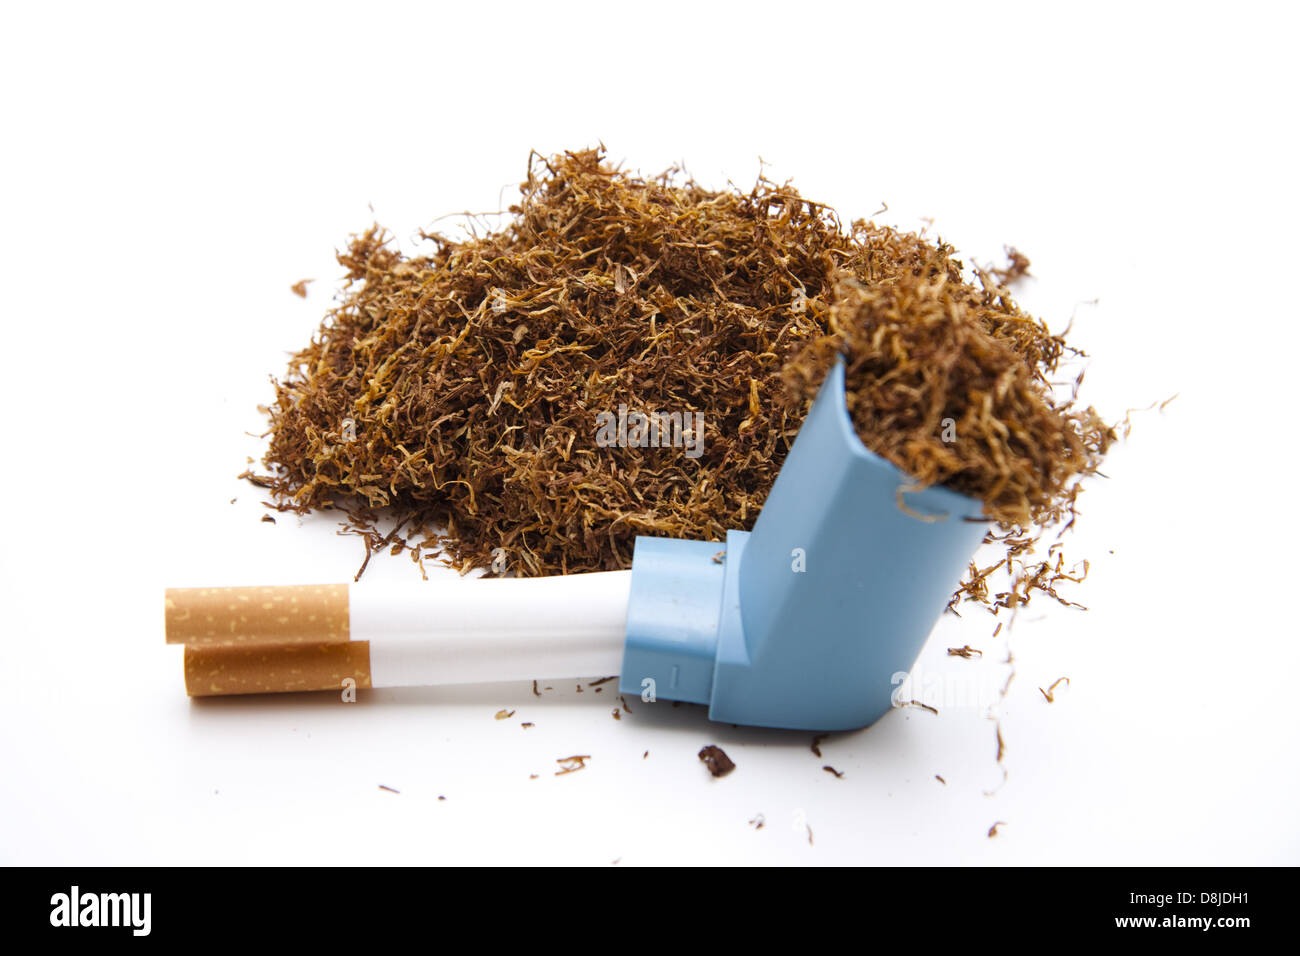 Tobacco with inhaler Stock Photo